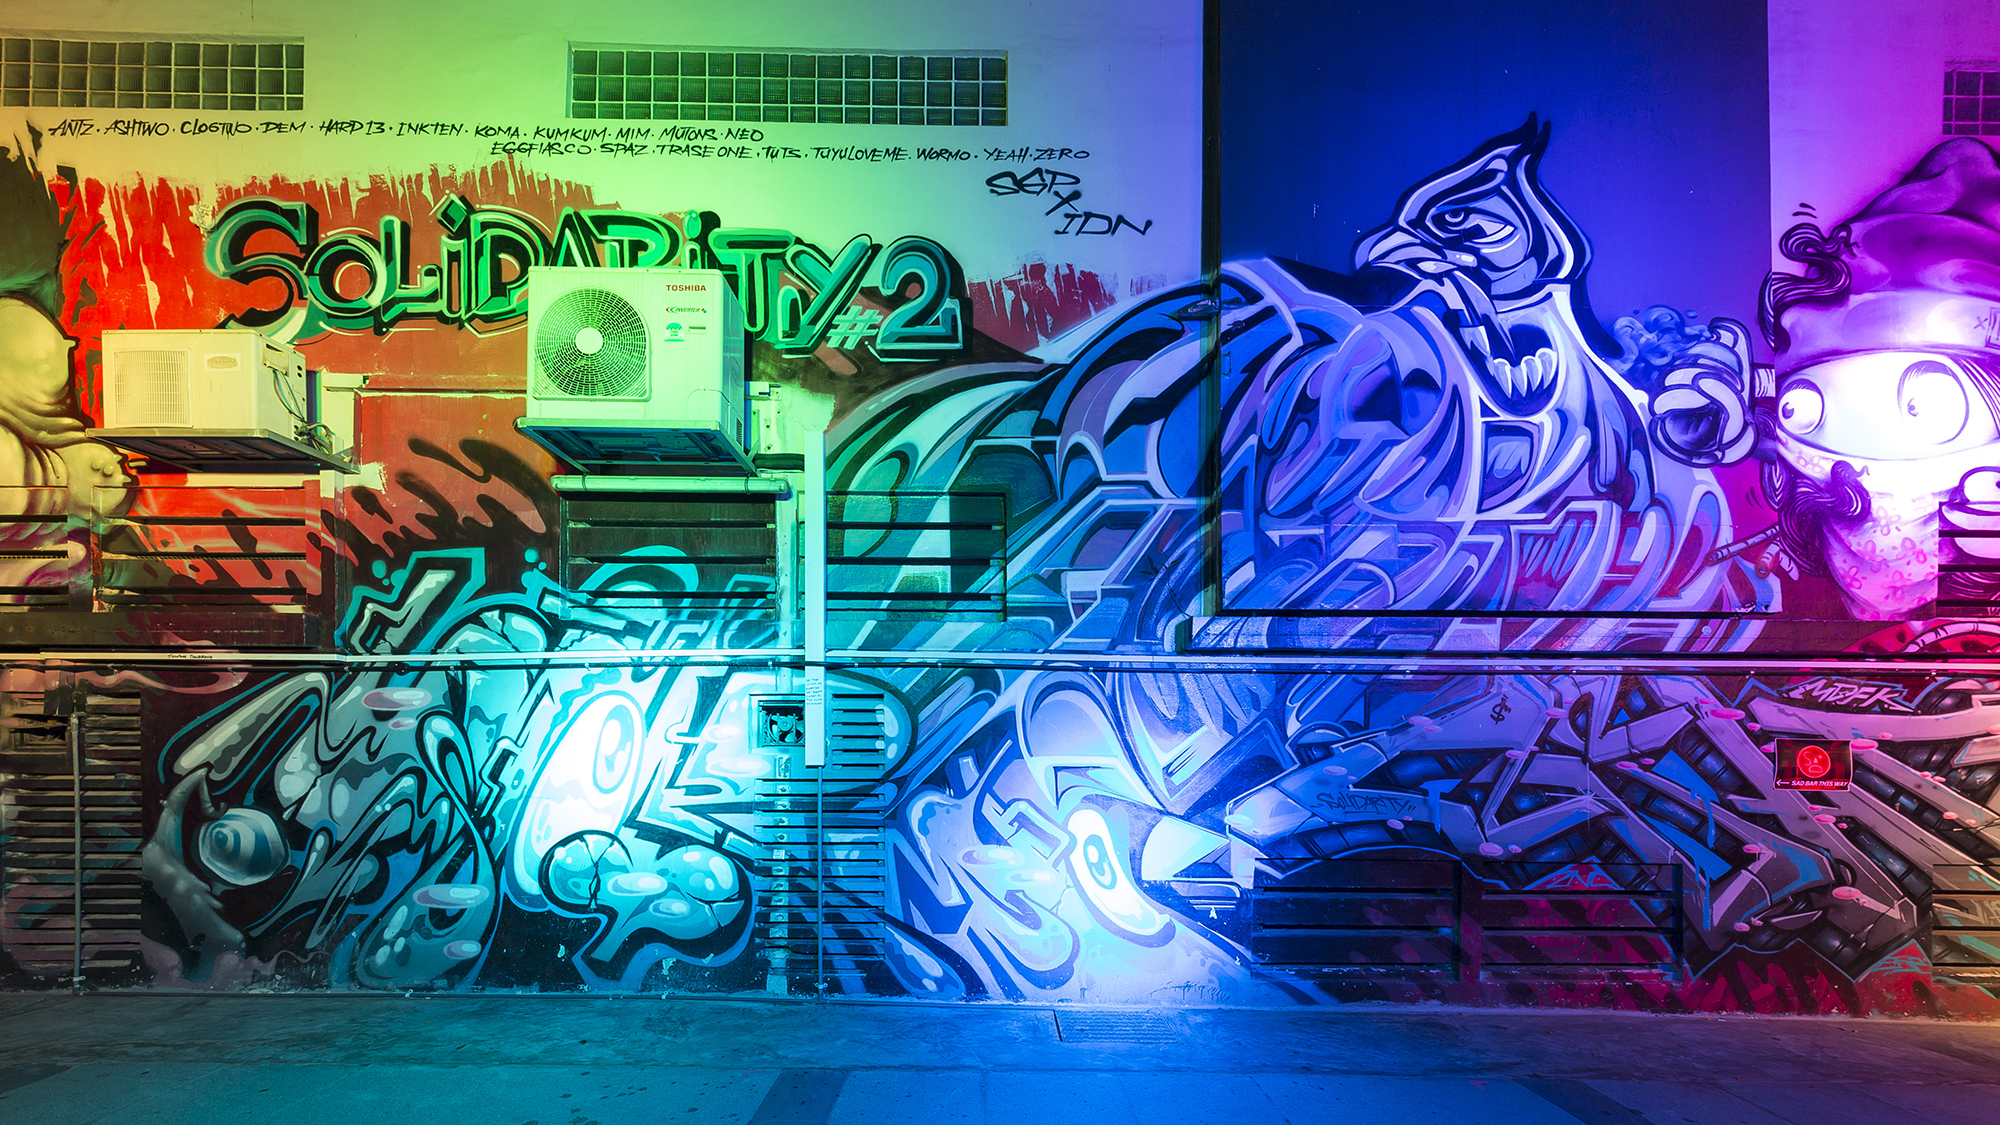 A graffiti covered wall at night lit up by coloured spotlights